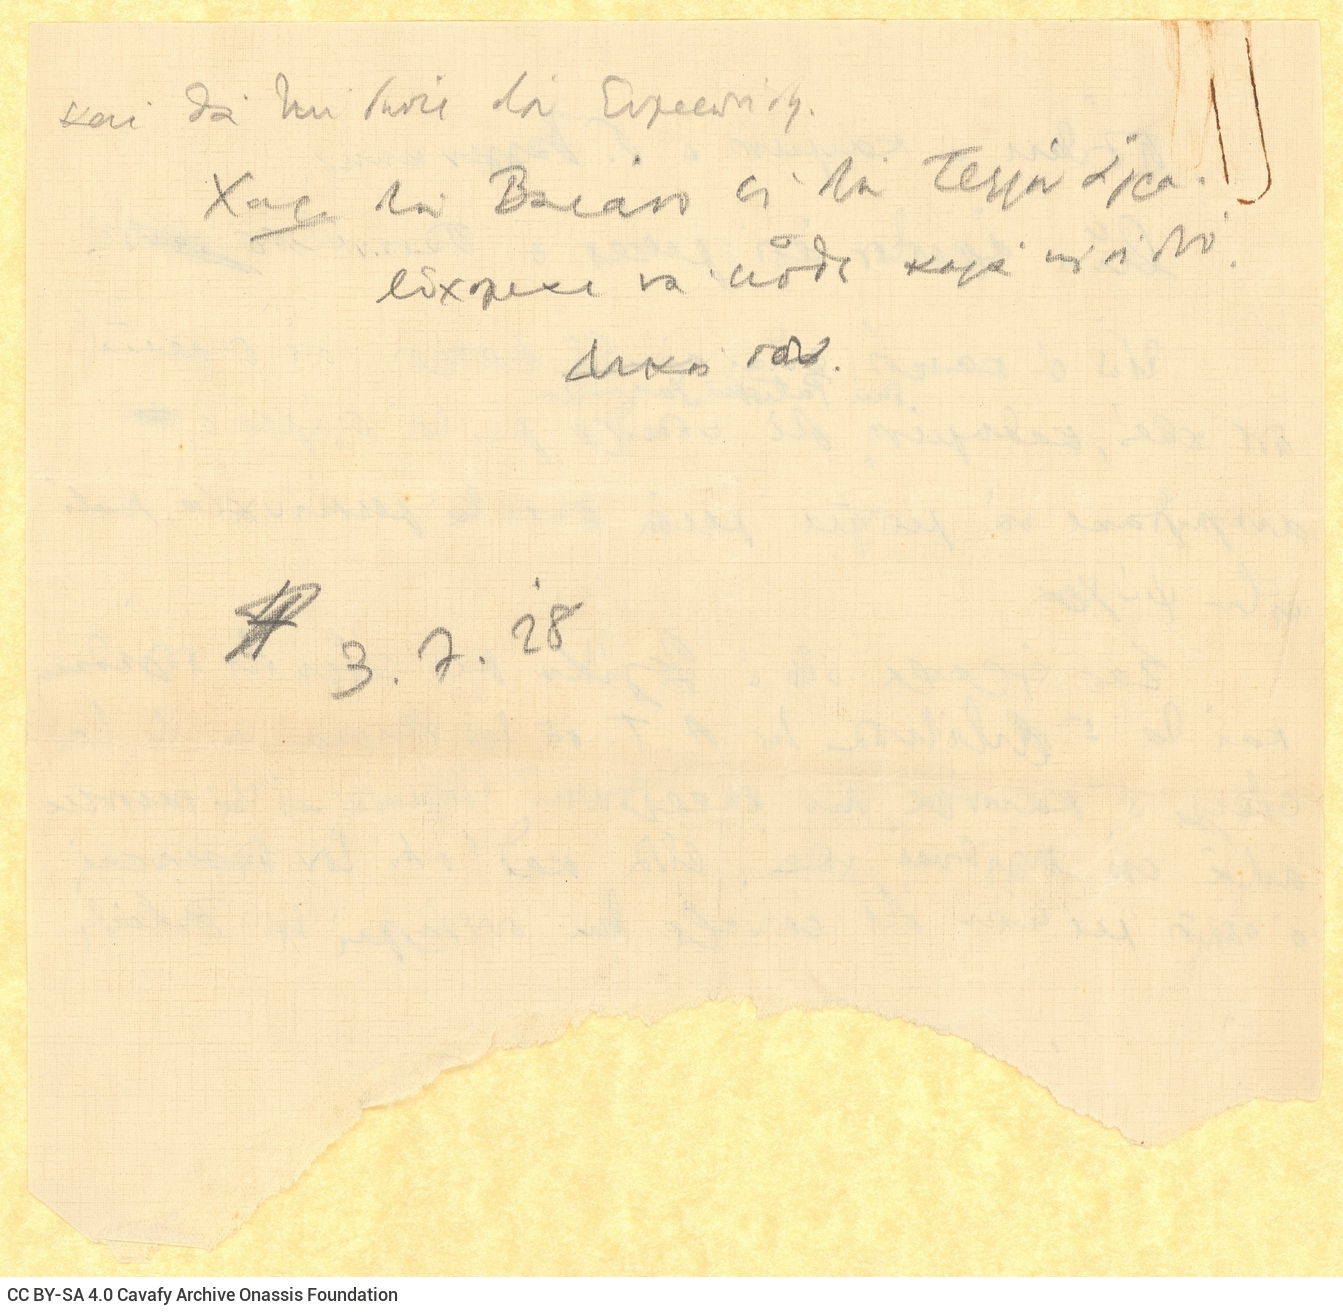 Handwritten draft letter by Cavafy to R[ica Singopoulo] on three sheets of different sizes. The poet refers to the correspond